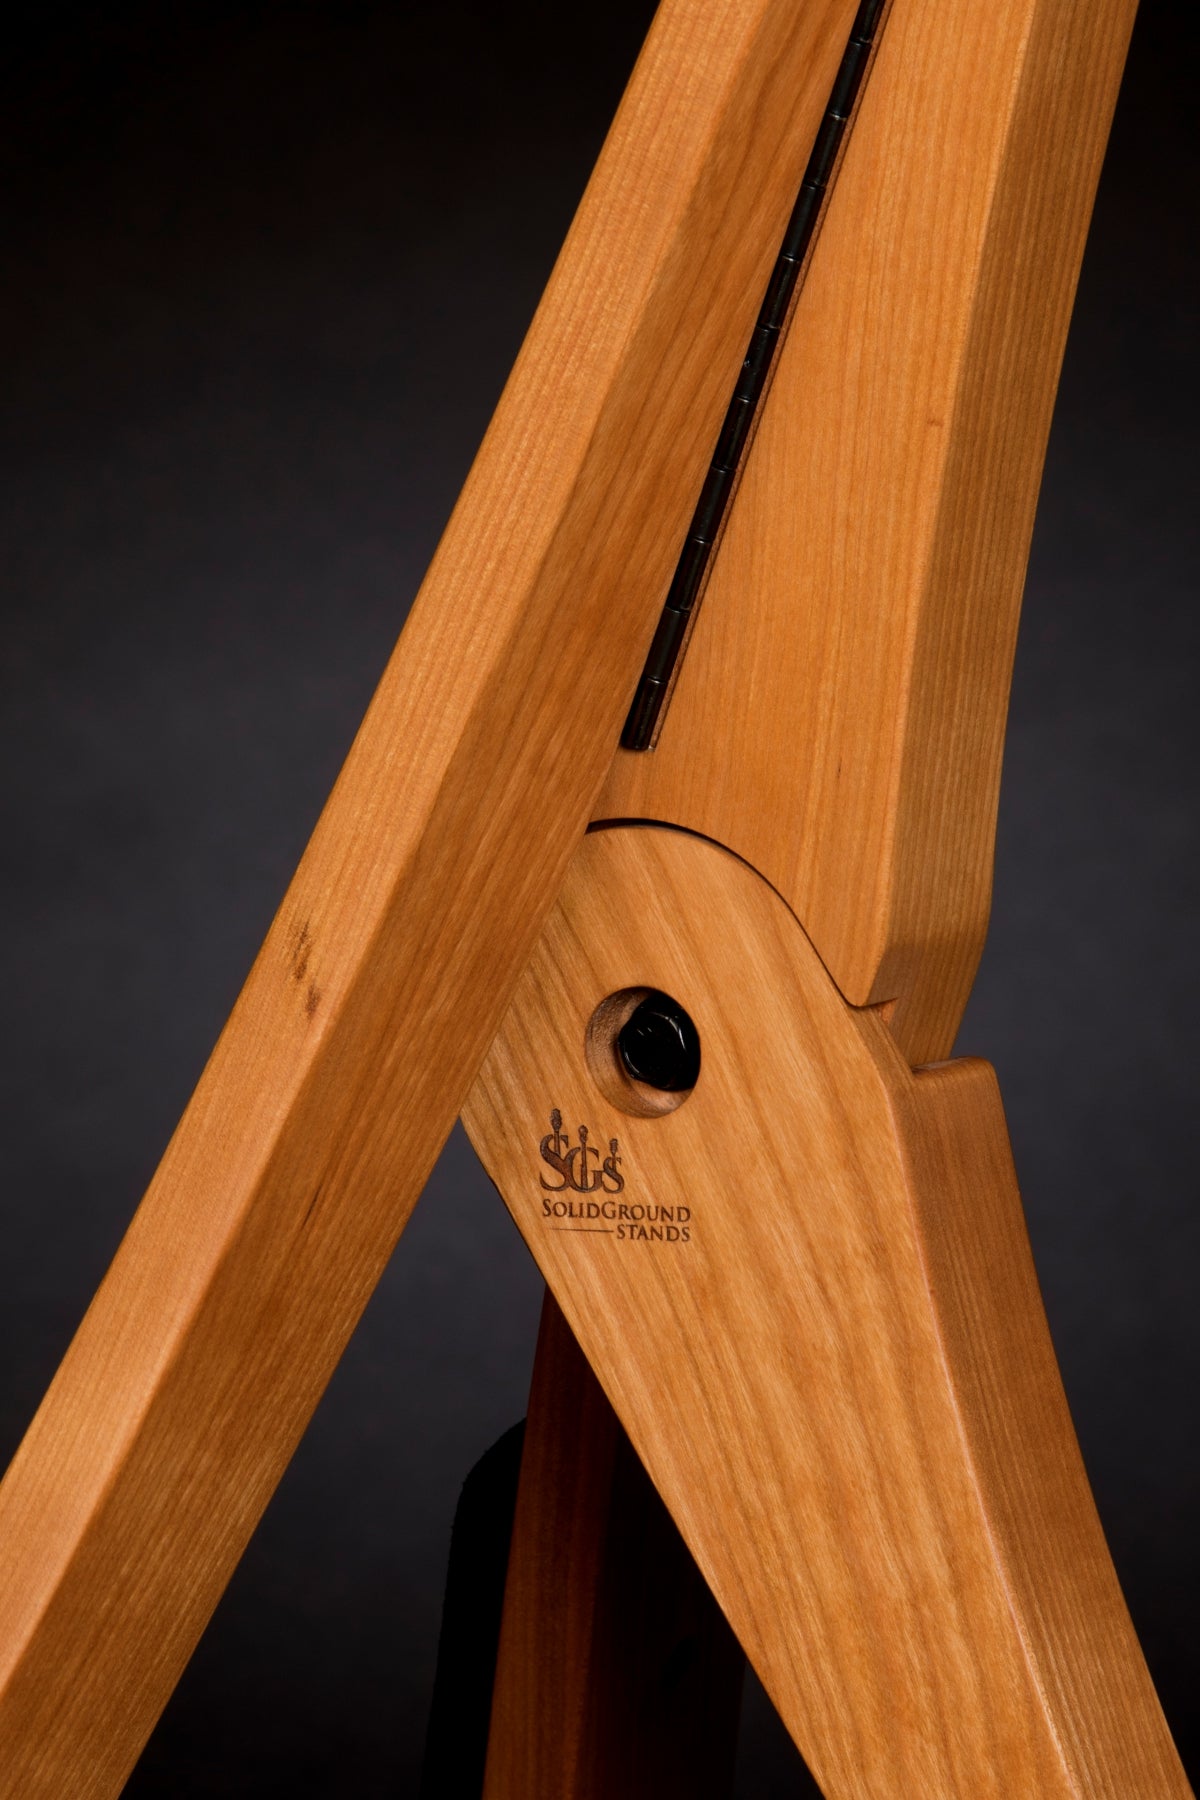 Folding cherry wood guitar floor stand joinery detail image